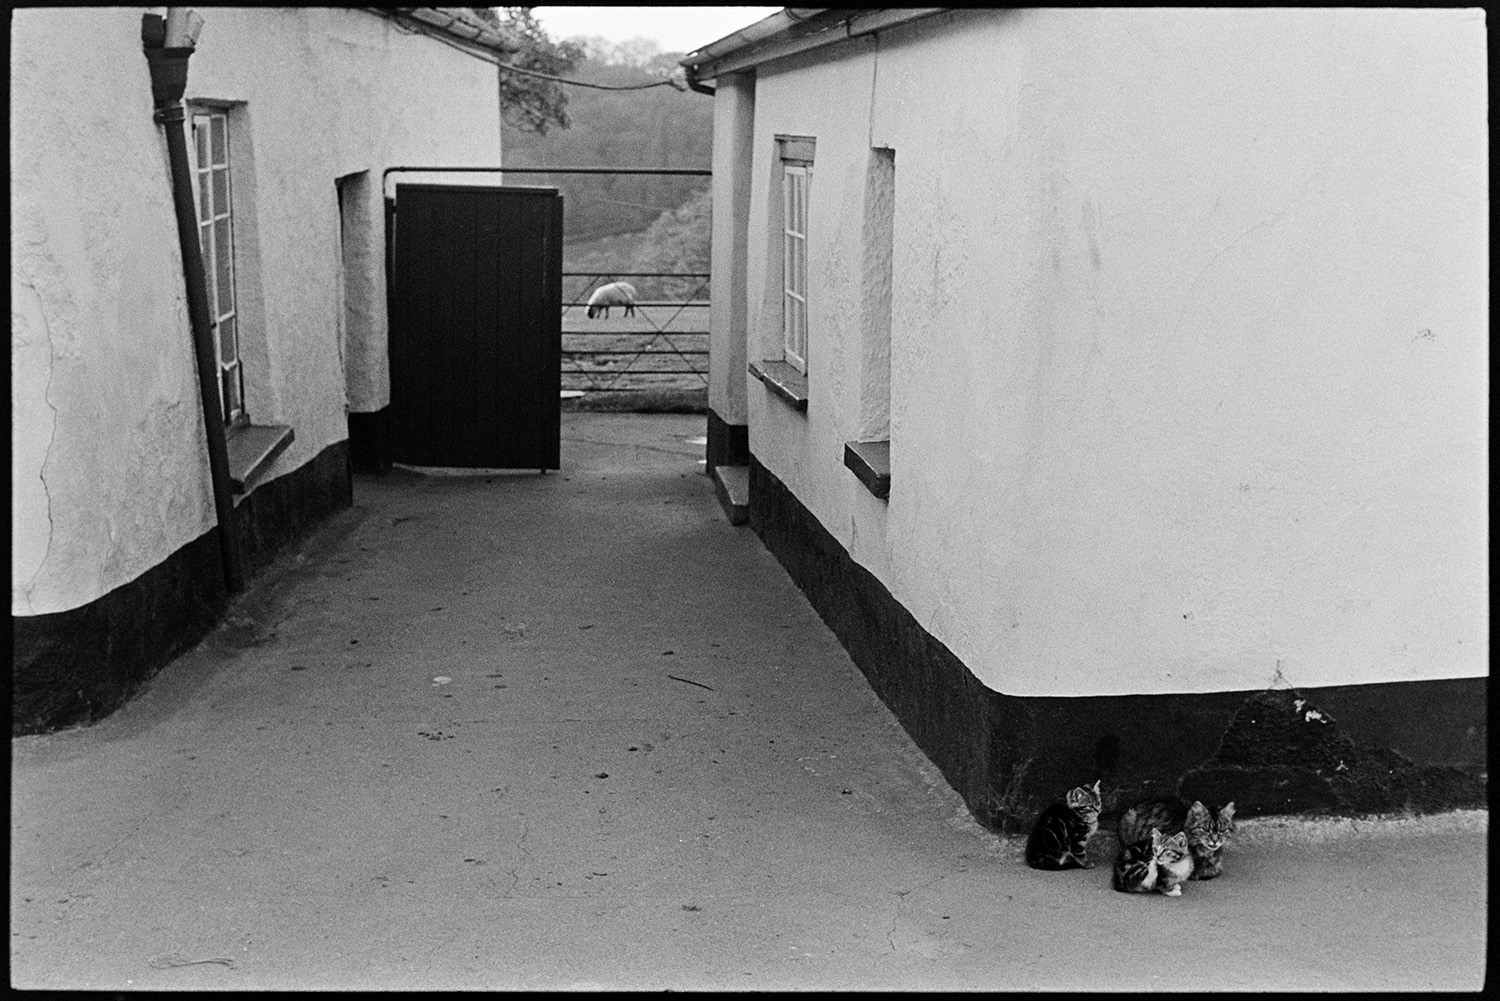 Back yard with cats and dog. 
[A cat and two kittens sat by a wall of the house in the back yard at Parsonage, Iddesleigh. A sheep can be seen grazing behind a metal field gate in the background.]